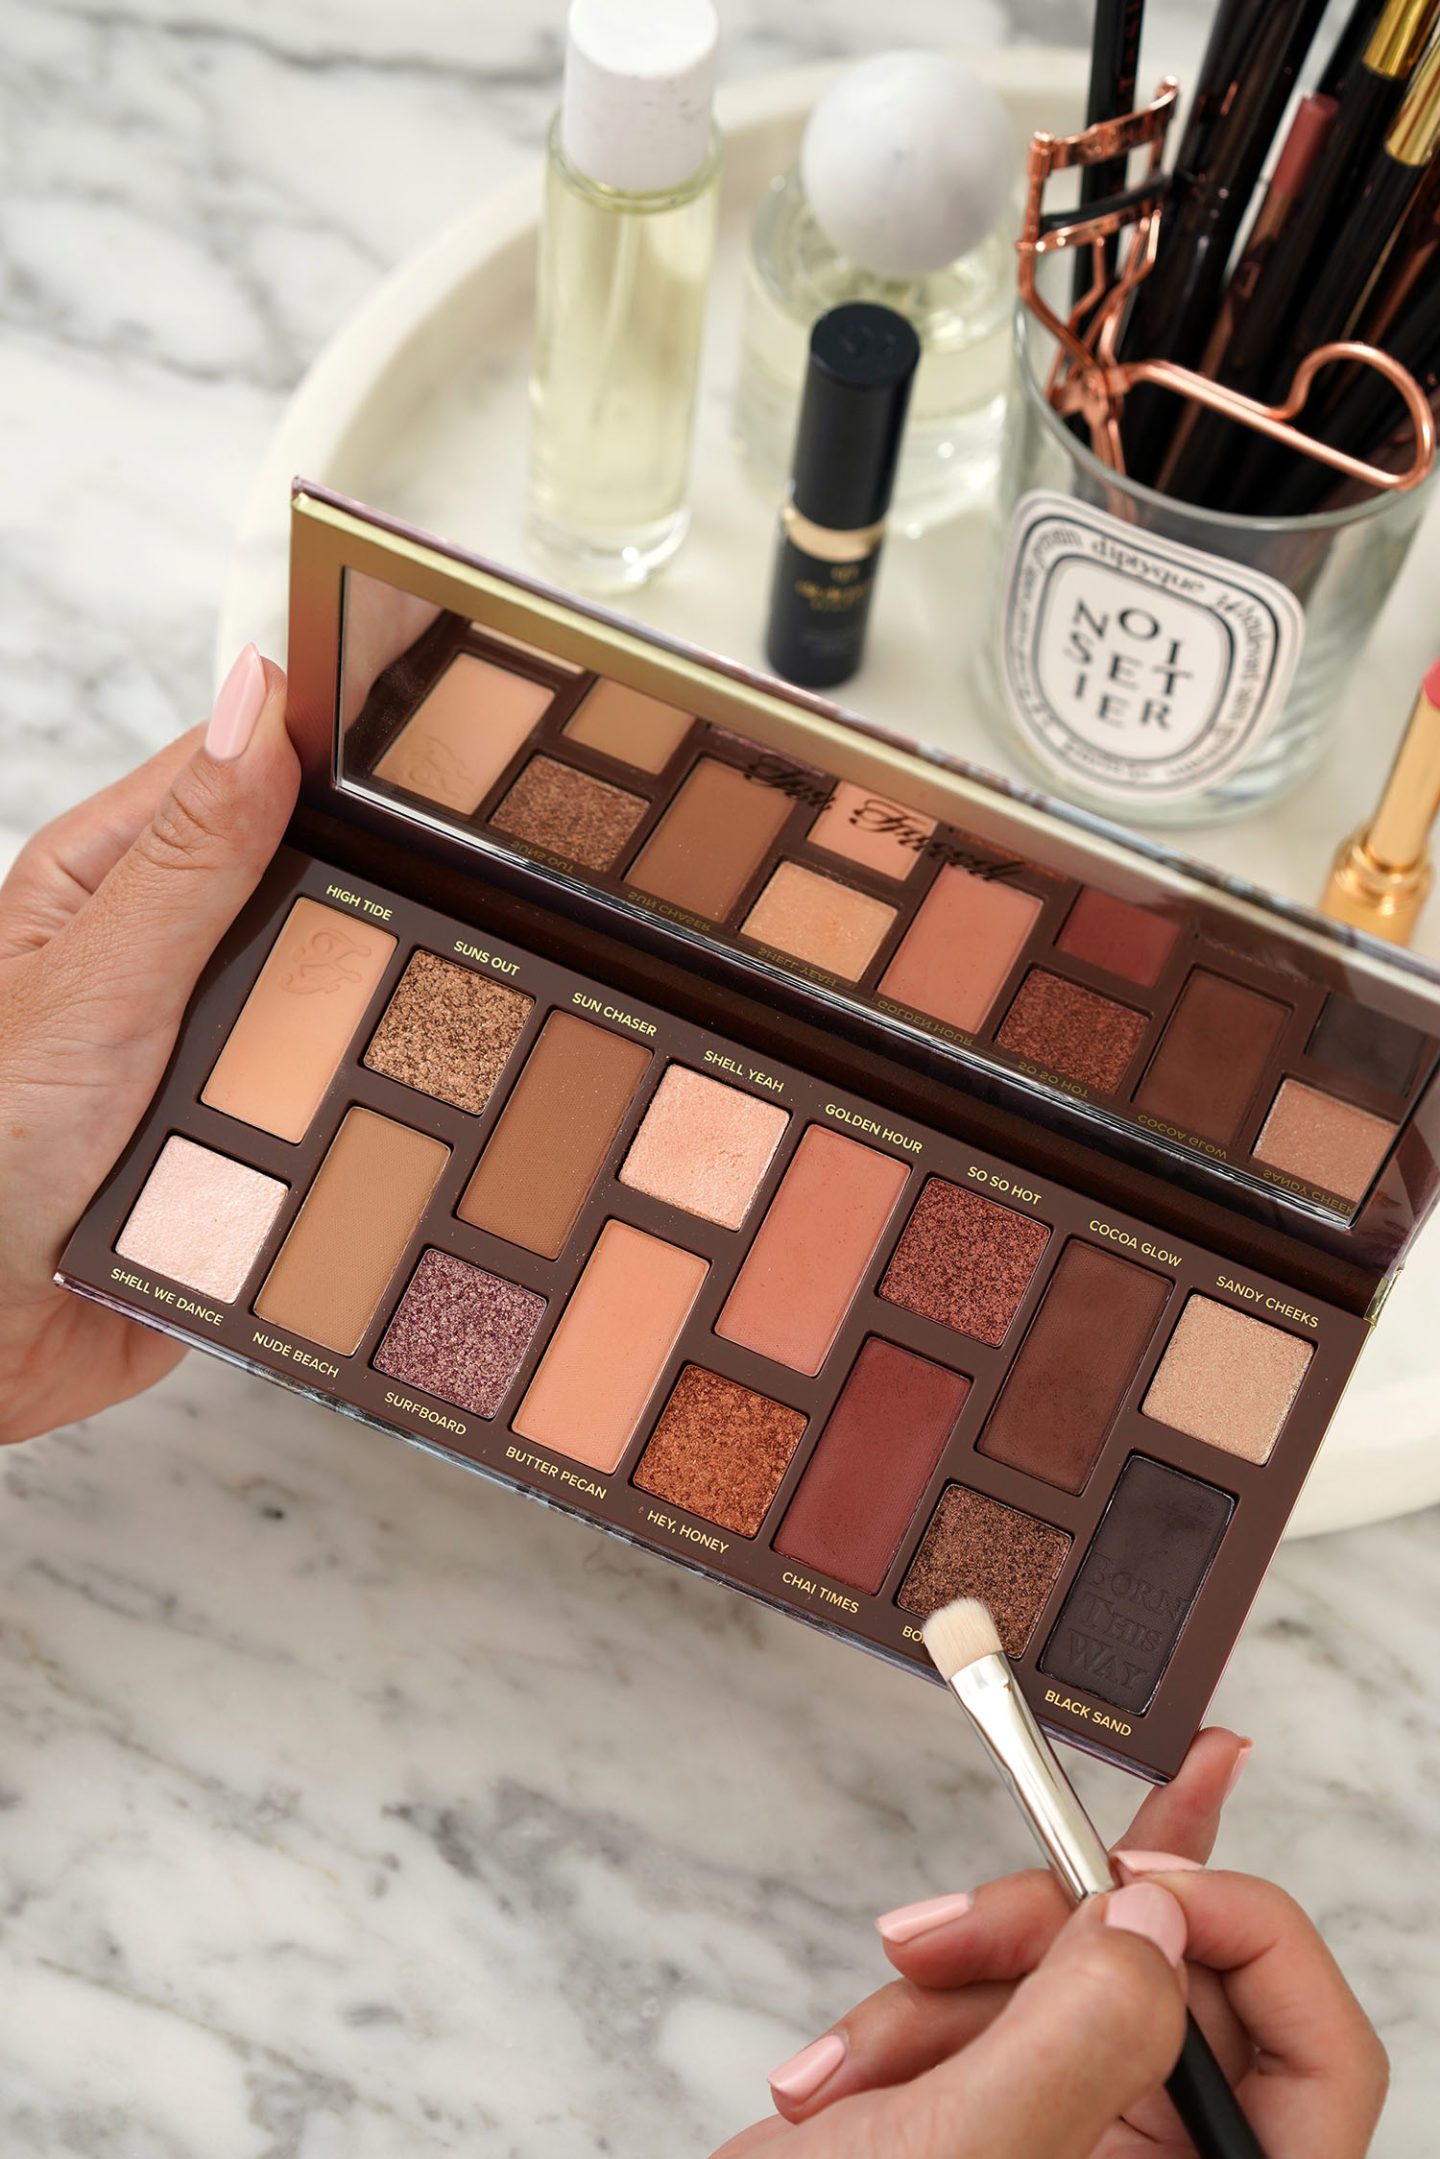 Too Faced Born This Way Sunset Stripped Eyeshadow Palette